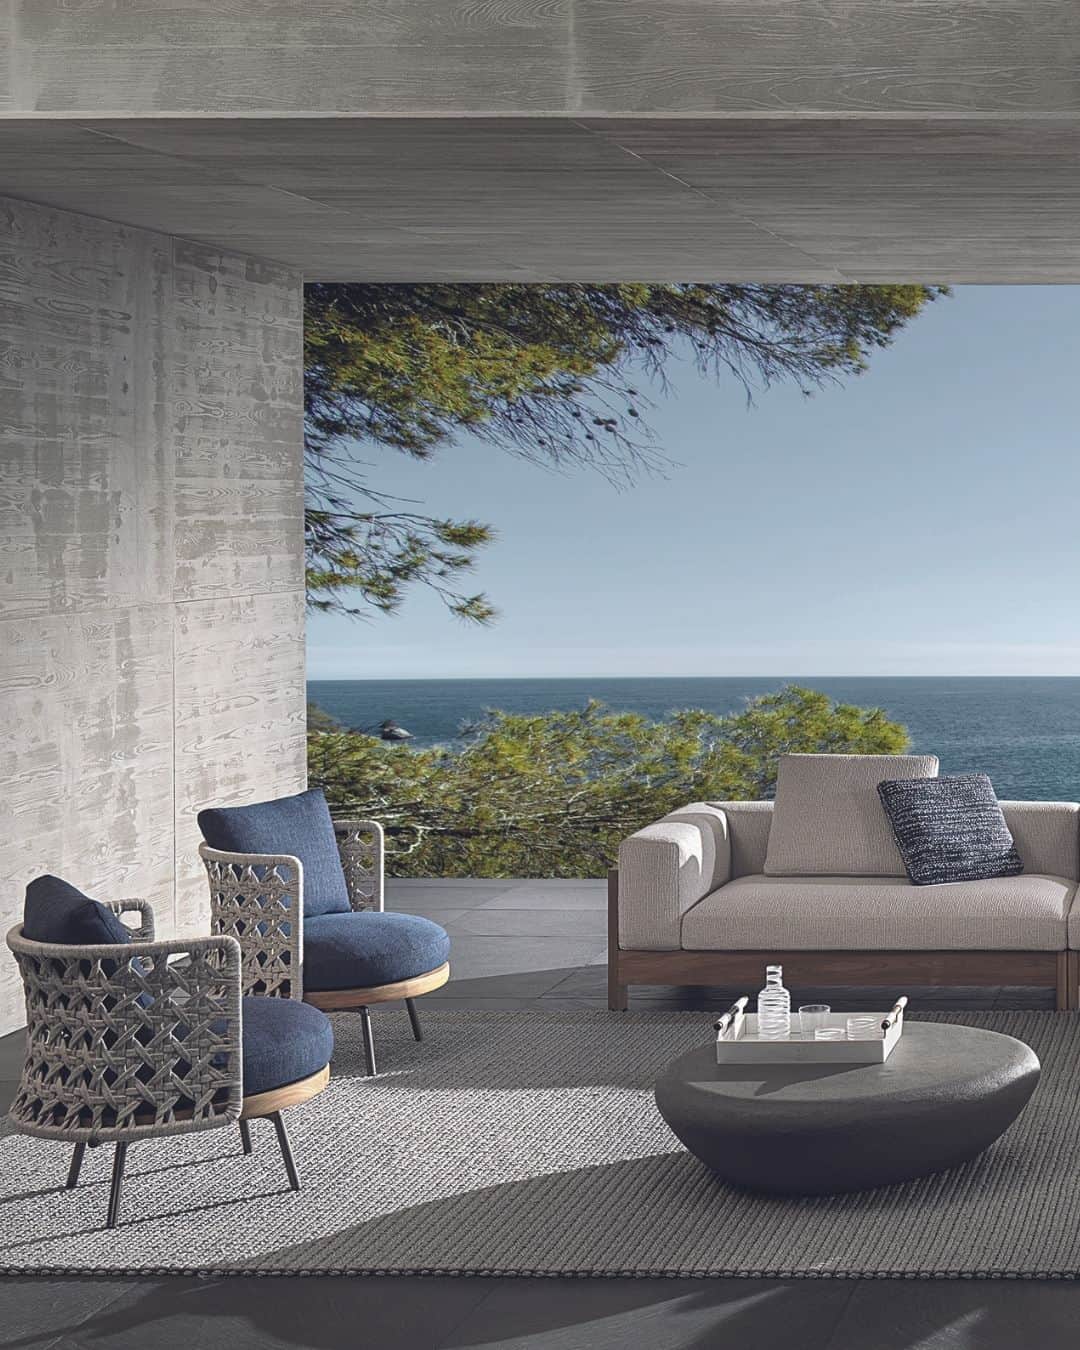 Minotti Londonのインスタグラム：「Created in 2006 as the first furnishing piece of Minotti’s outdoor collection, Alison Iroko evolves with an additional finish that makes it even more natural and easy to blend into green and open-air spaces.  Alison Iroko Nature, a modular seating system with rigorous and formal lines, is characterised by an Iroko wood frame with a natural, unpainted finish.  The formal rigour and rational, square aesthetics of its structure are balanced by the extreme comfort and softness of the upholstered parts.  Designed by Rodolfo Dordoni and Roberto Minotti.  Tap the link in our bio to discover Alison Iroko Nature.  #minotti #minottilondon #rodolfodordoni #interiordesign #design #madeinitaly #italianstyle #italianfurniture #luxuryfurniture」